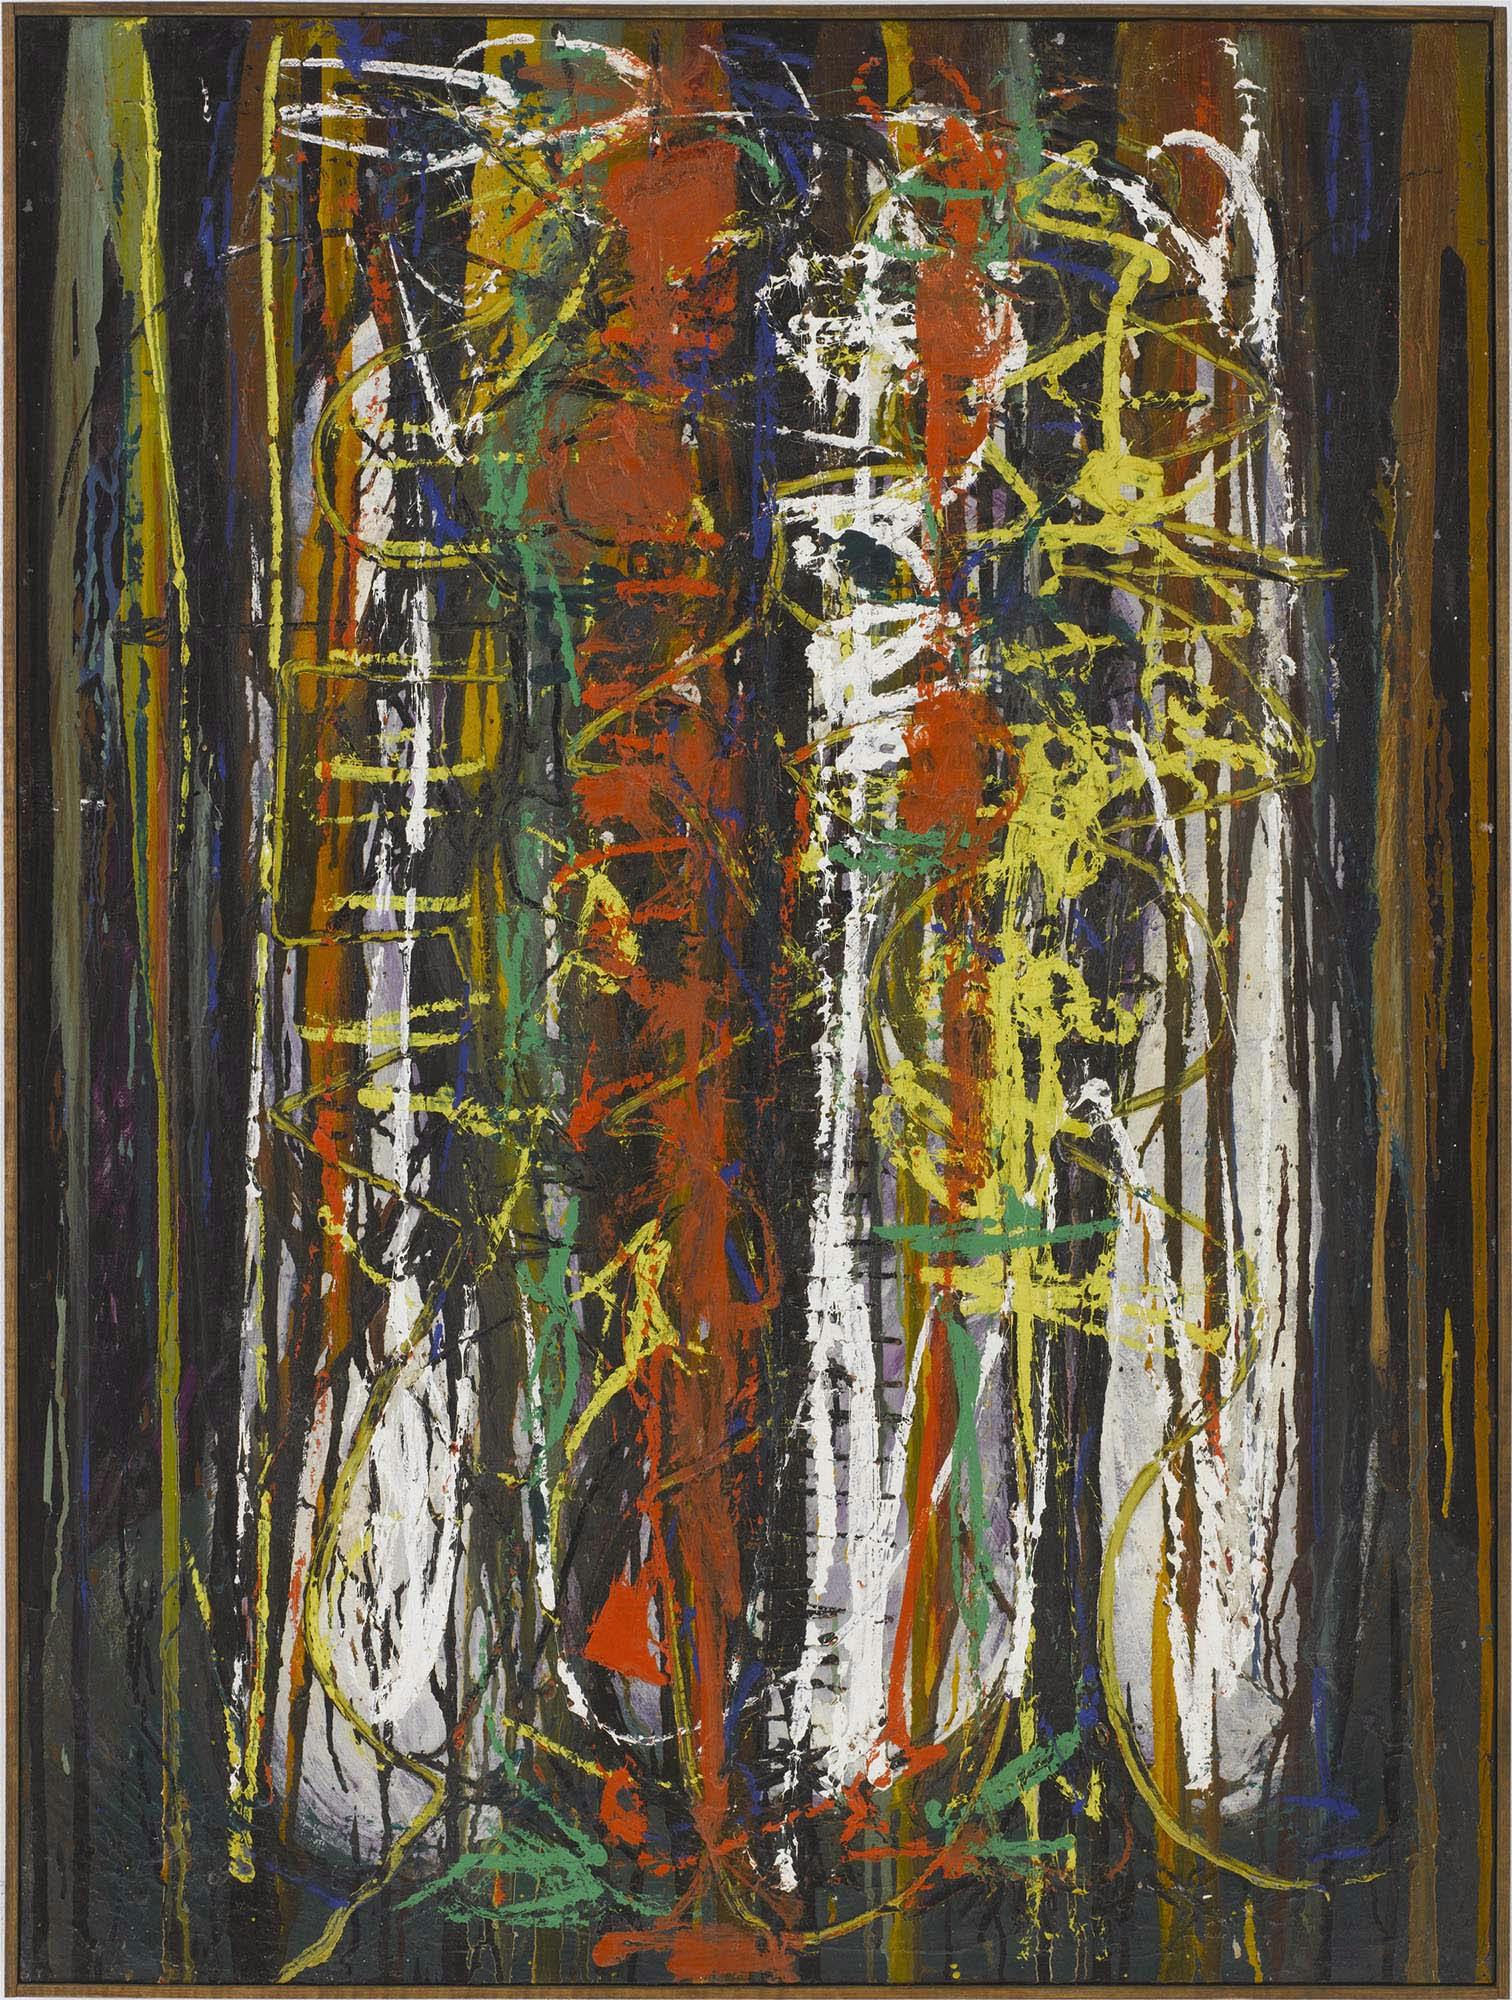 1950
Oil on canvas
40 x 30 in. (101.6 x 76.2 cm)
 – The Richard Pousette-Dart Foundation